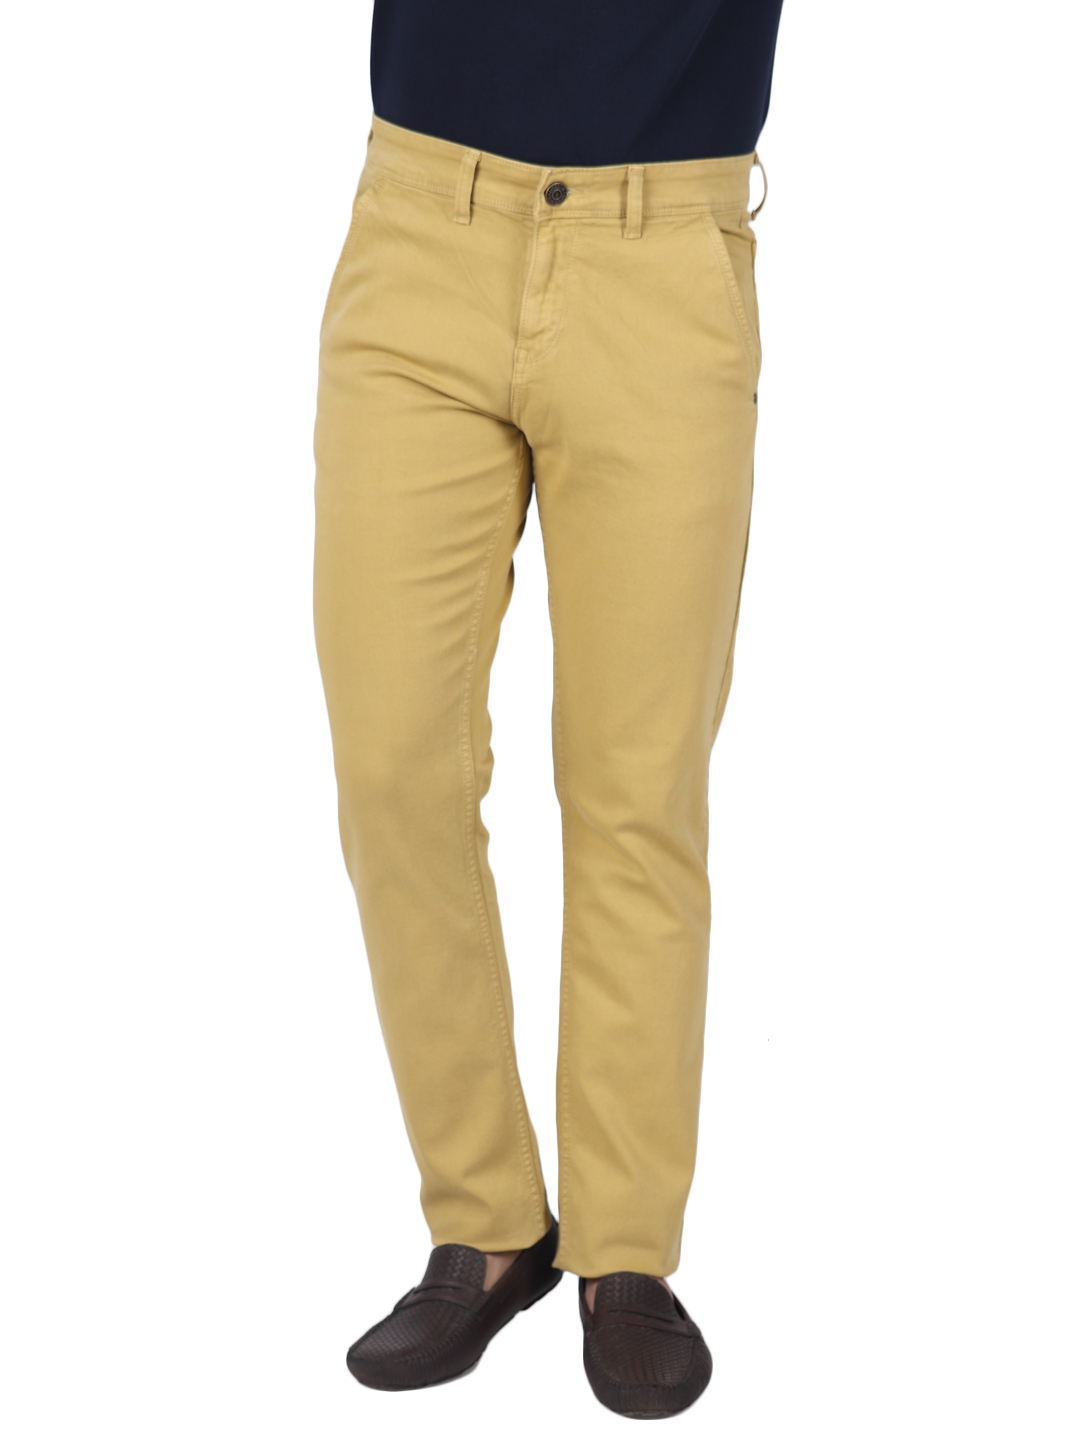 D'cot by Donear | D'cot by Donear Men's Brown Cotton Jeans